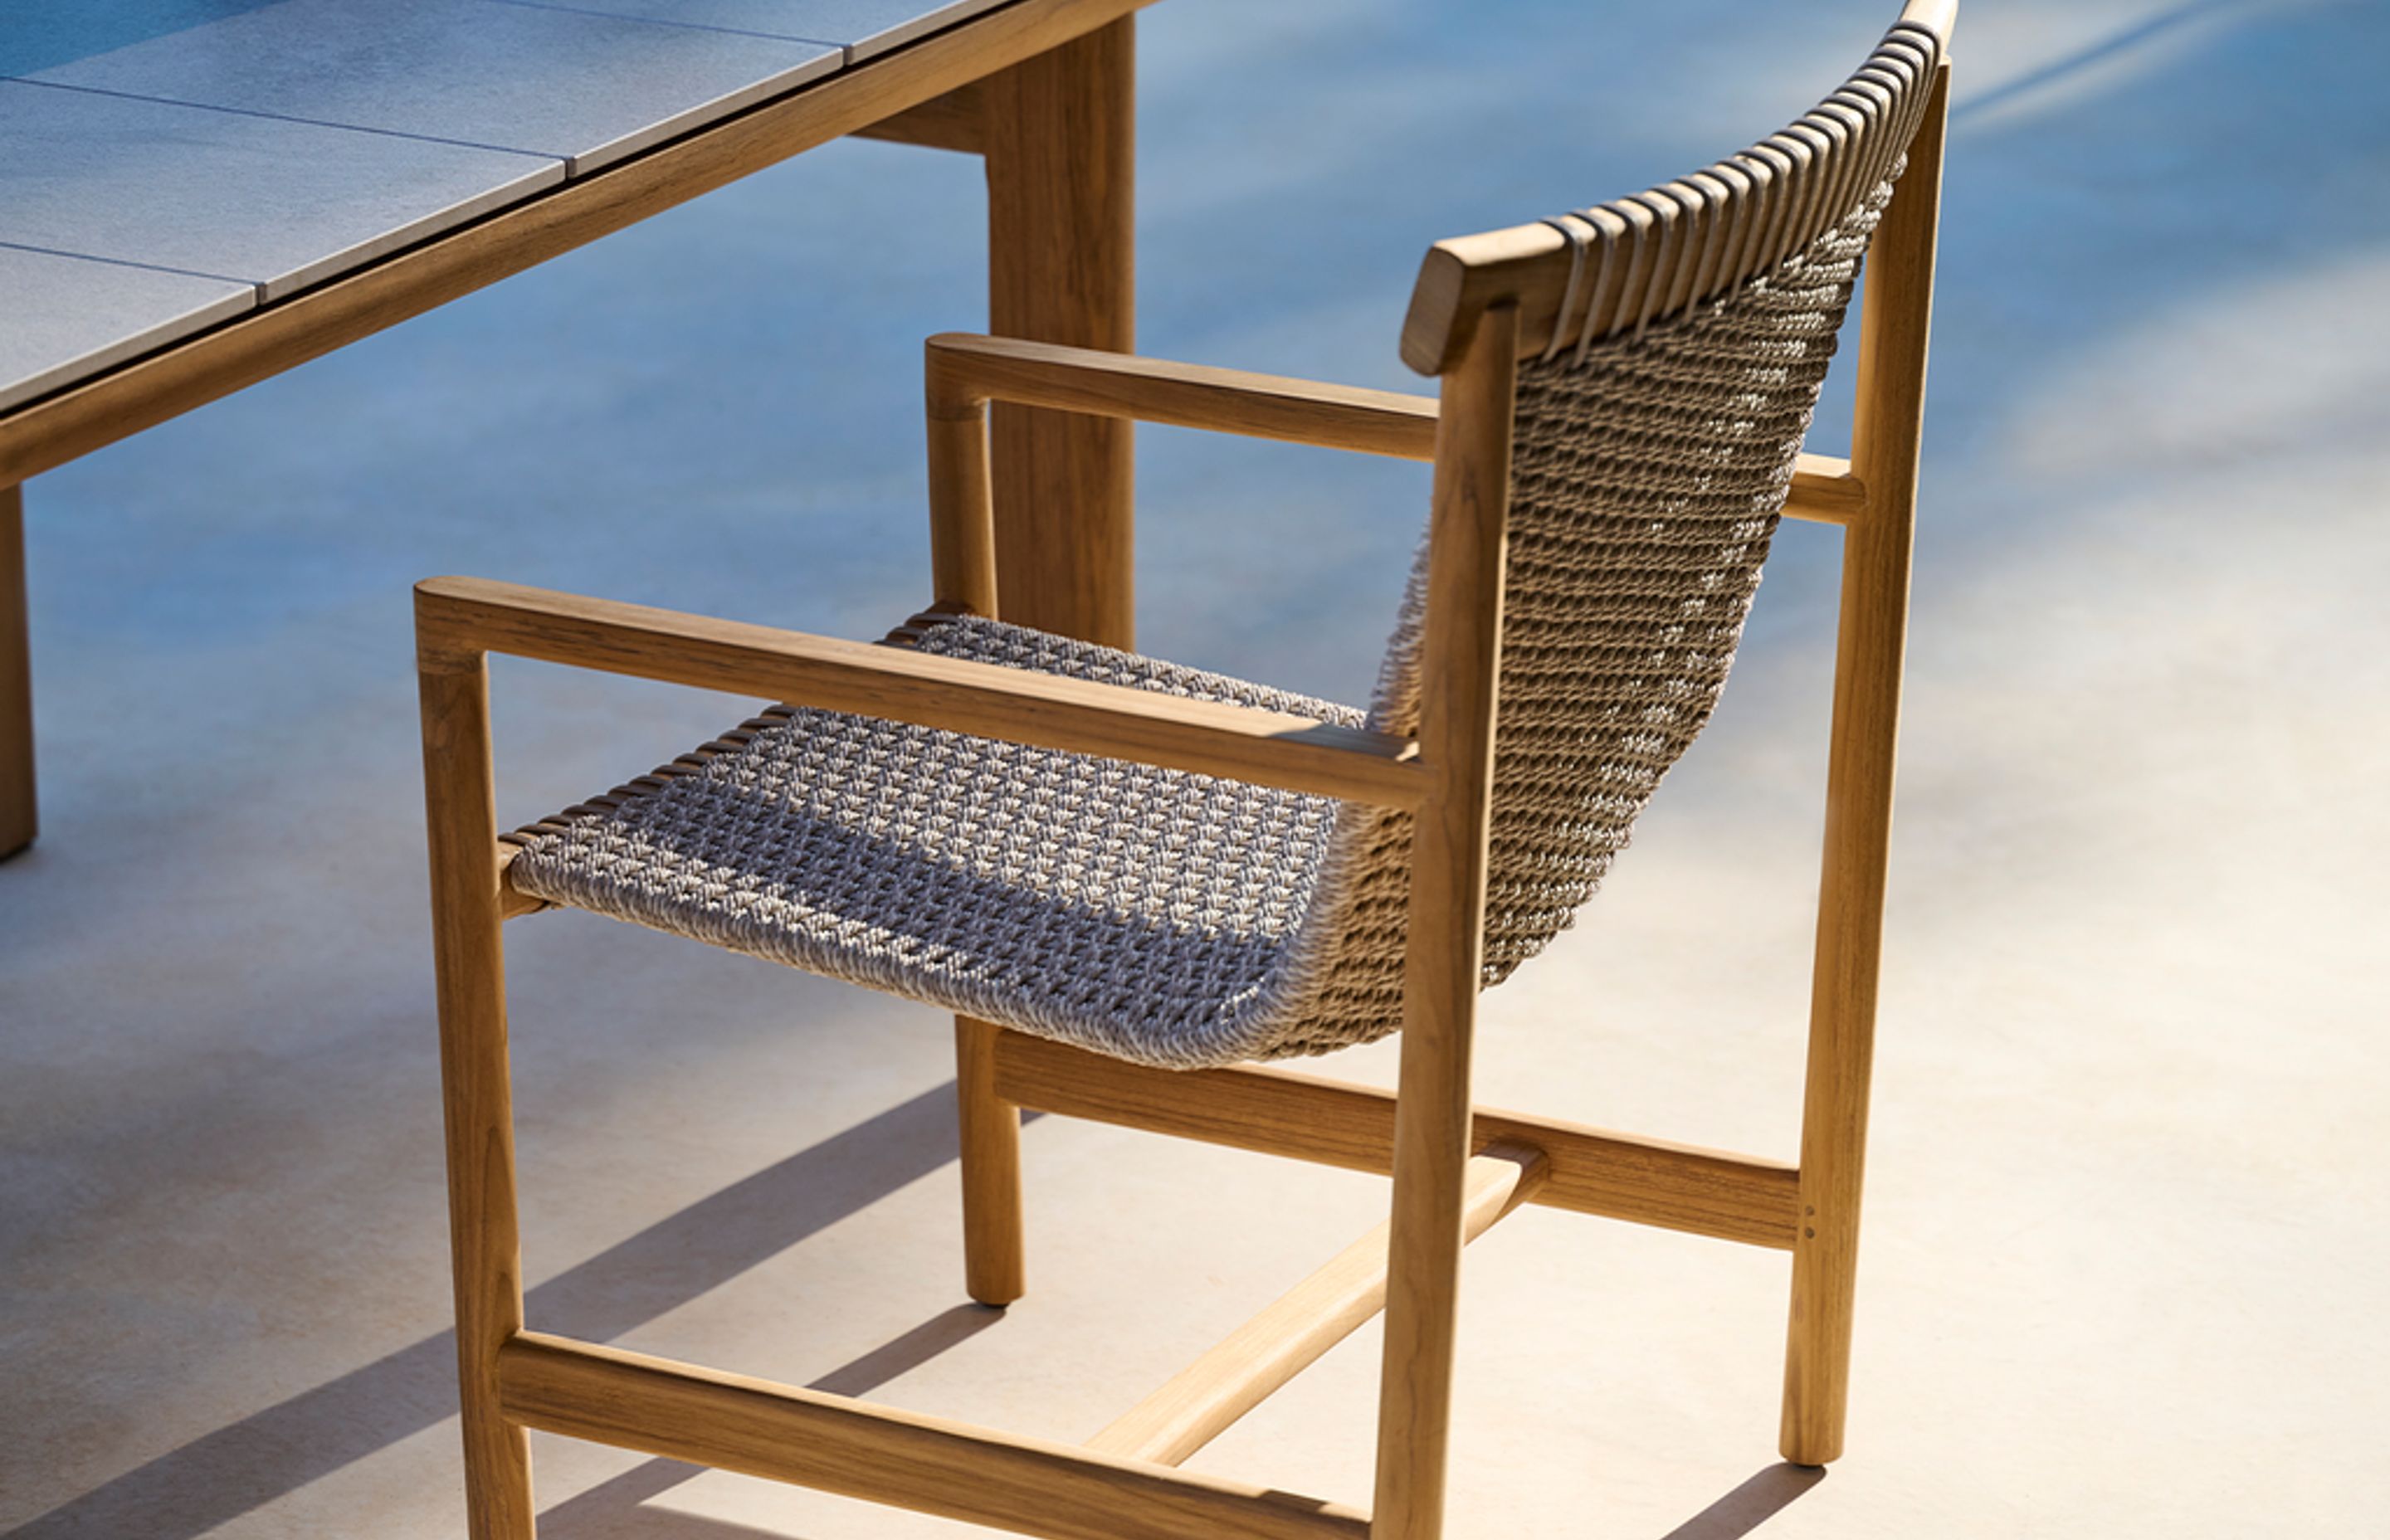 The Amanu Armchair by Tribu, brings interior quality outside, combining comfort and sustainability. The chairs slimline-teak frame, provide lightness and grace, making the chairs extremely comfortable and stylish.